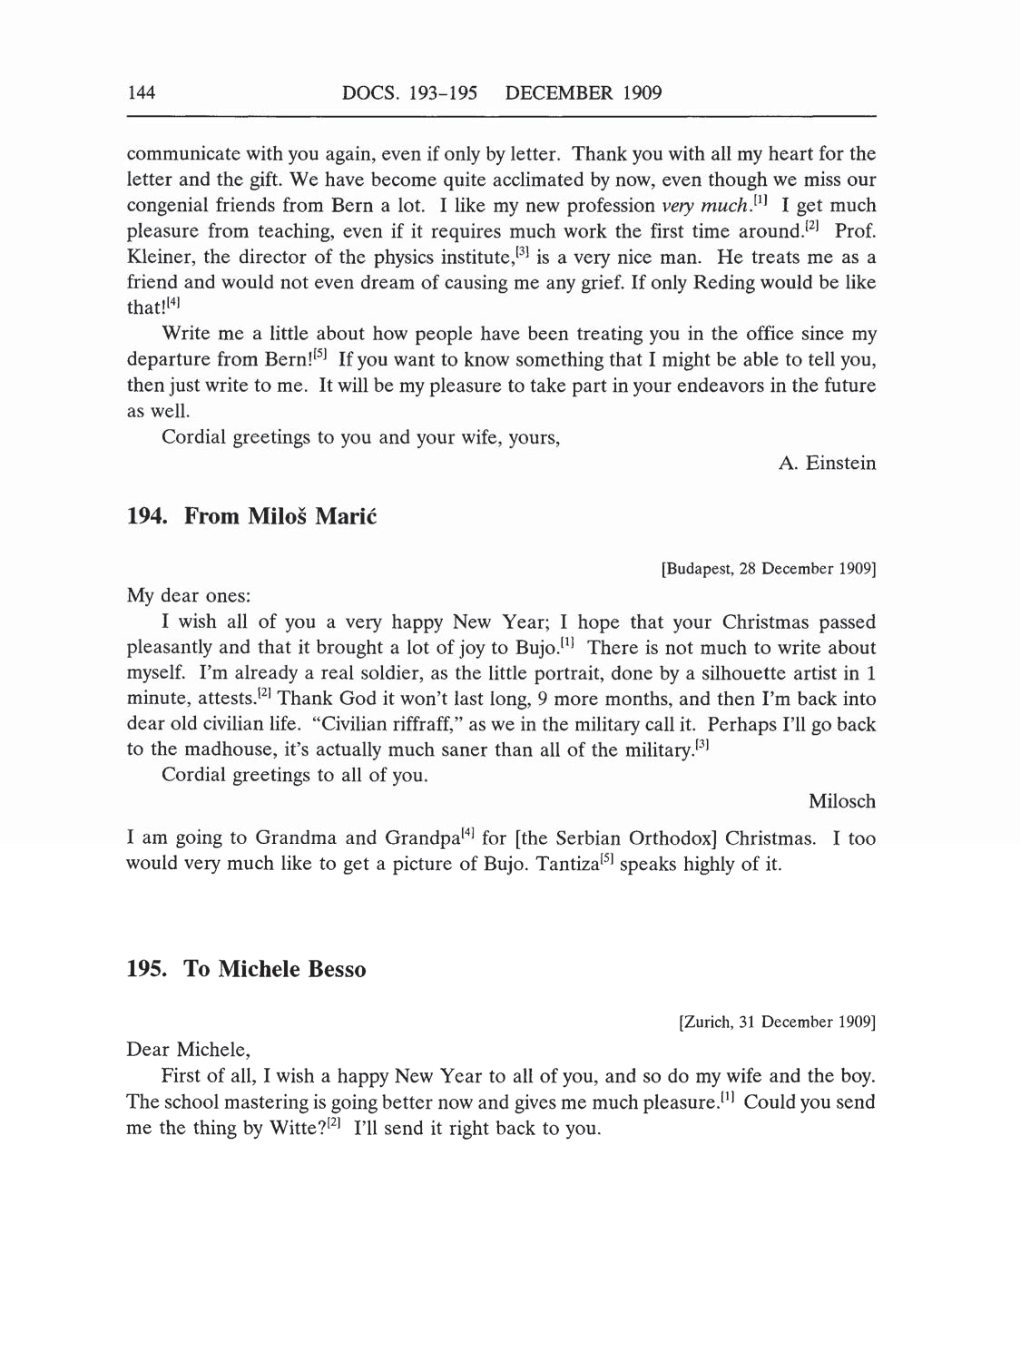 Volume 5: The Swiss Years: Correspondence, 1902-1914 (English translation supplement) page 144